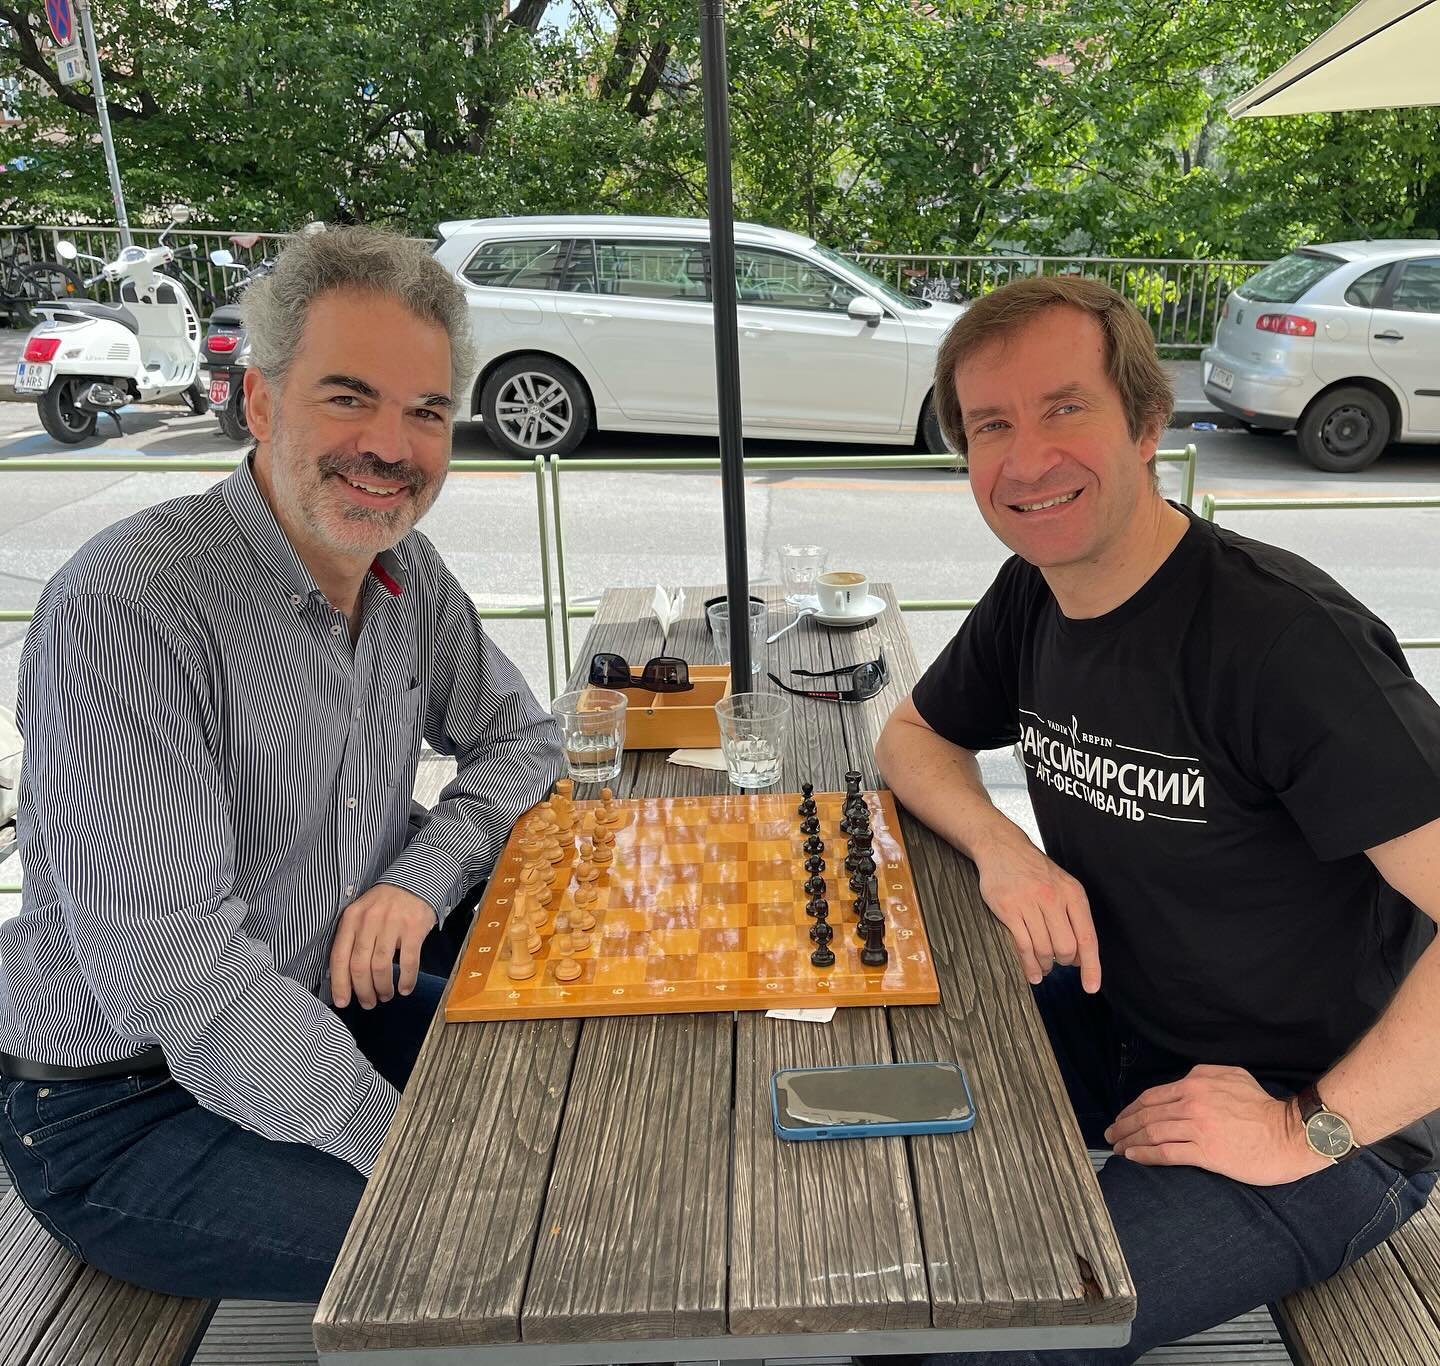 Coffee and a few games of chess with my friend and outstanding pianist Nikolai Lugansky ahead of his concerts with the Grazer Philharmoniker @musikvereingraz on 6 and 7 May. (A draw is the best result I can hope for, when playing against him!)

#ches